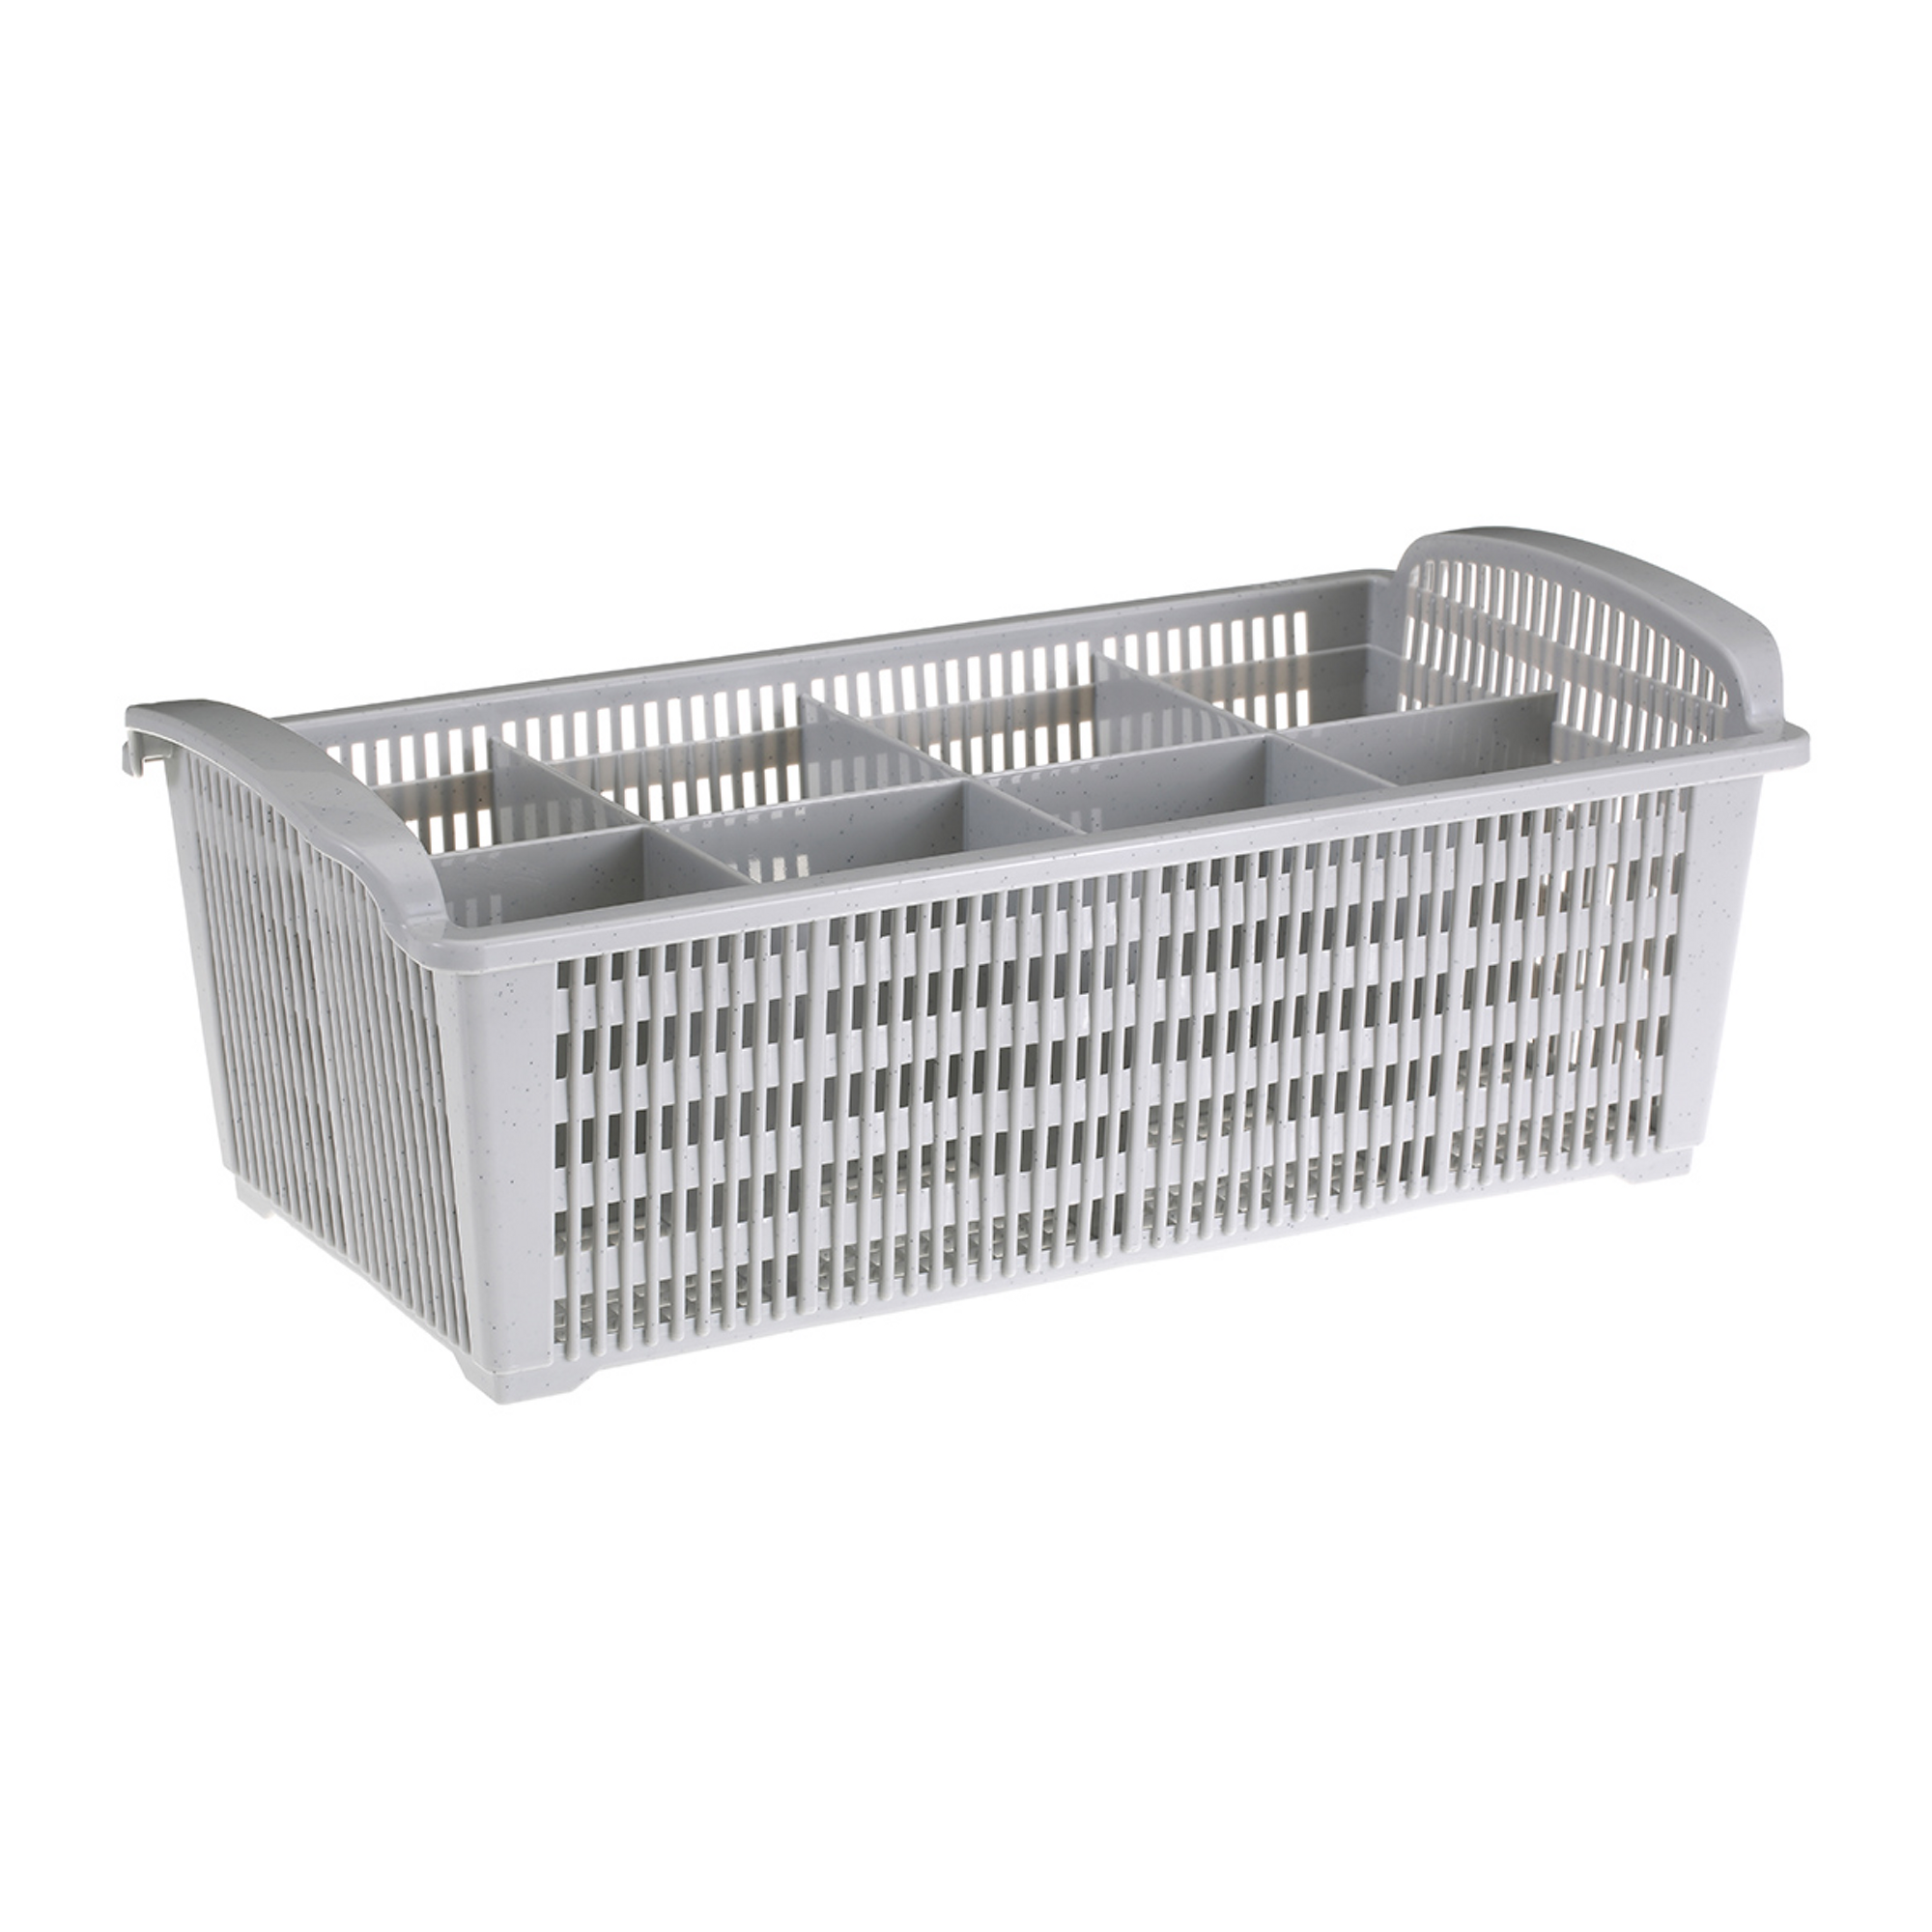 Wvh Eight Compartment Cutlery Basket